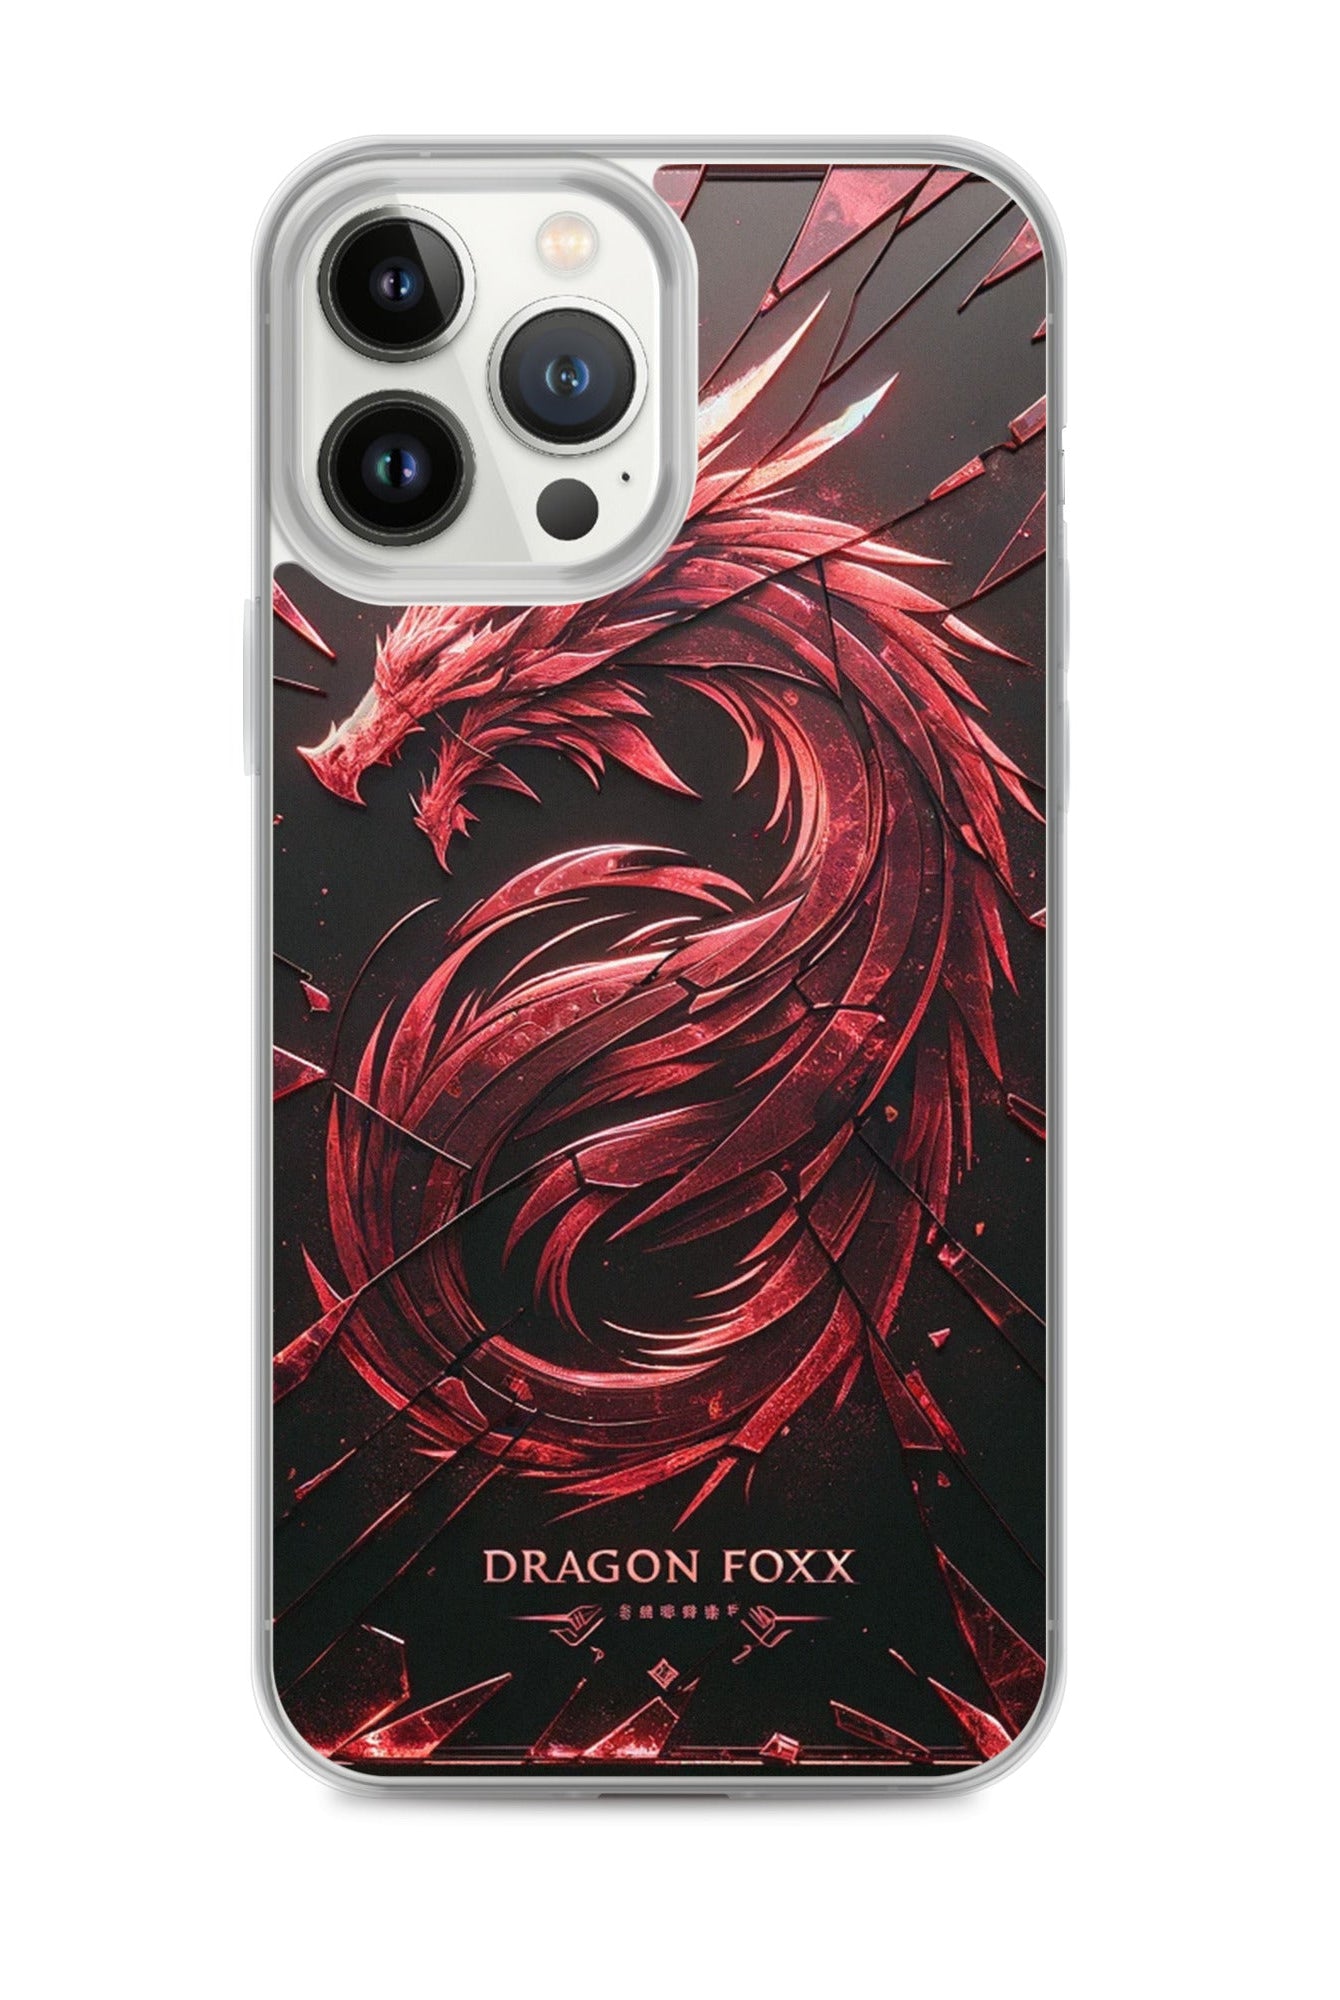 DRAGON FOXX™ Red Dragon Phone Case for iPhone® - Phone Case for iPhone® - DRAGON FOXX™ - DRAGON FOXX™ Red Dragon Phone Case for iPhone® - 7805351_13801 - iPhone 13 Pro Max - Red/Black/Clear - Accessories - Dragon Foxx™ - DRAGON FOXX™ Phone Case for iPhone®